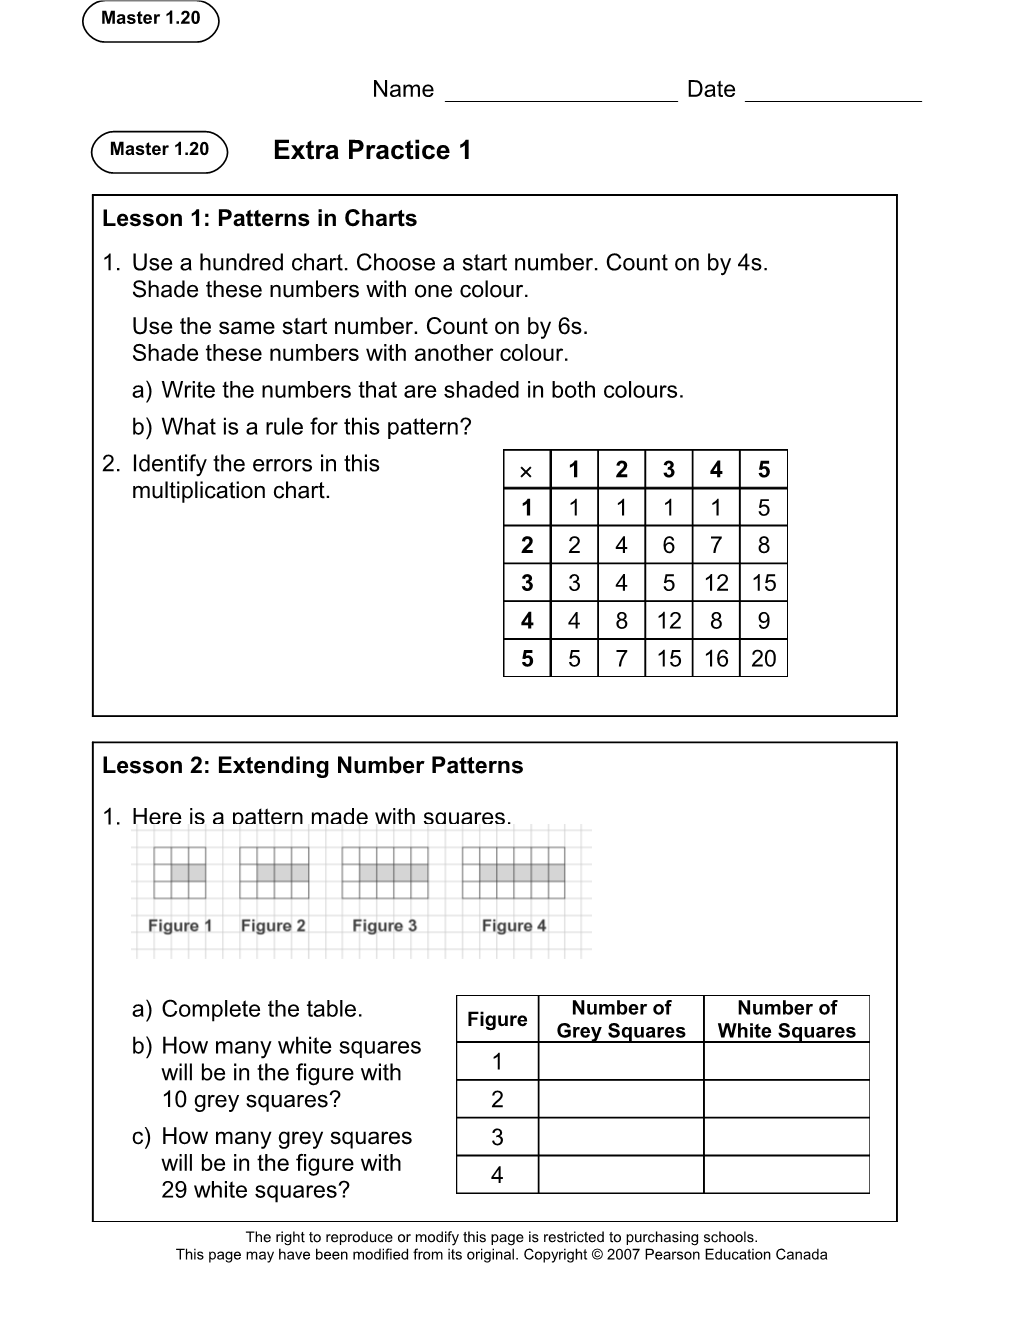 Lesson 2: Extending Number Patterns